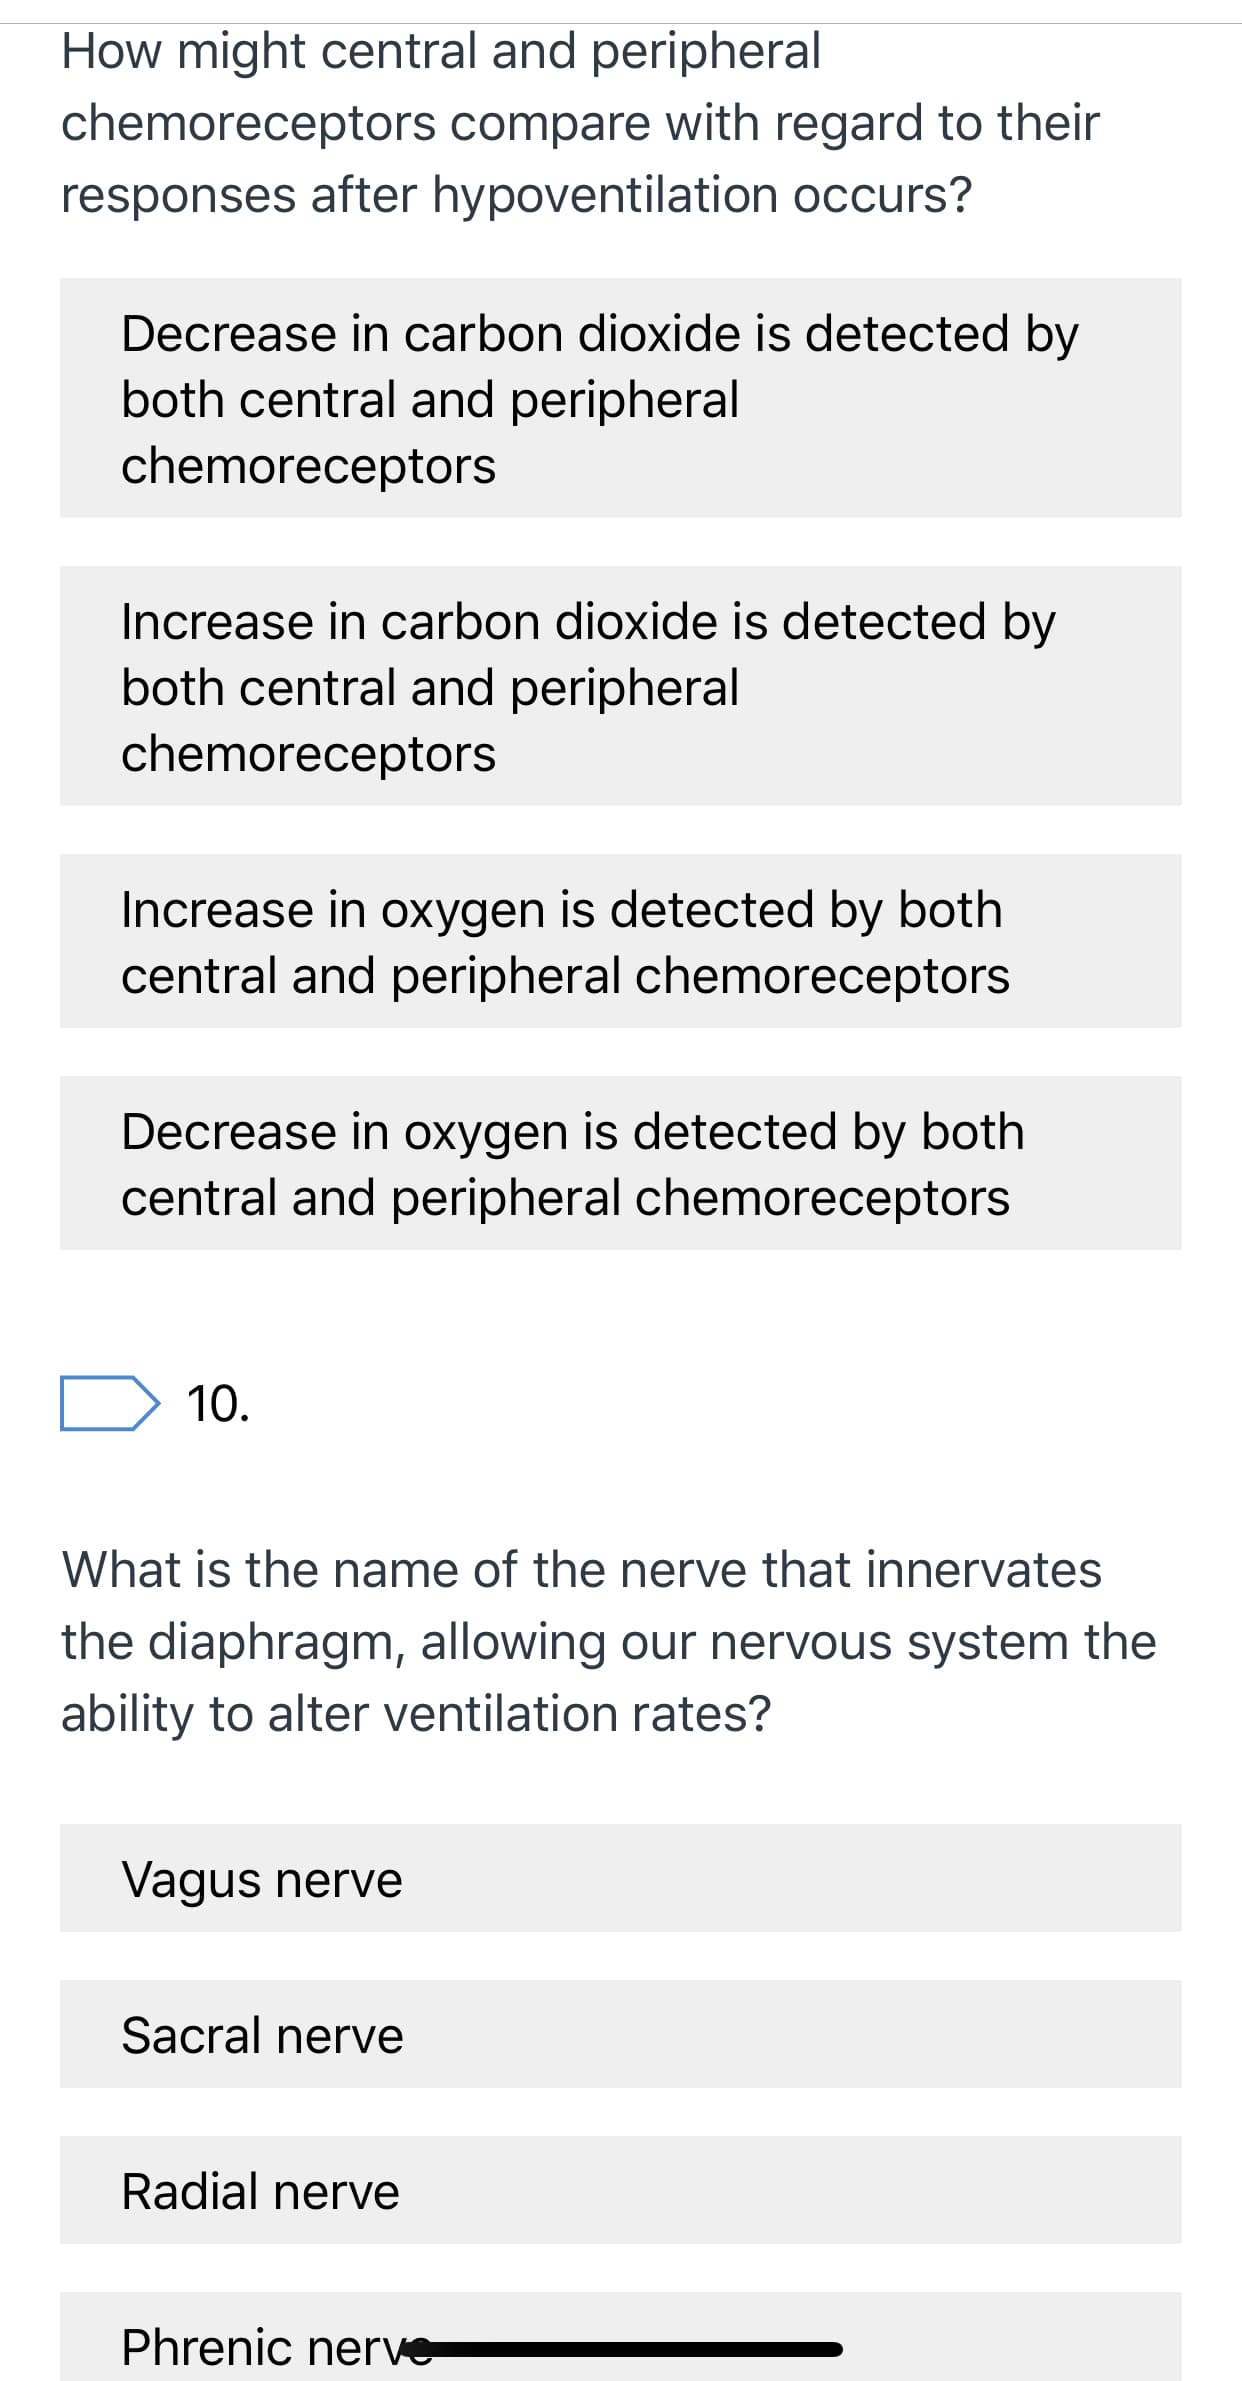 How might central and peripheral
chemoreceptors compare with regard to their
responses after hypoventilation occurs?
Decrease in carbon dioxide is detected by
both central and peripheral
chemoreceptors
Increase in carbon dioxide is detected by
both central and peripheral
chemoreceptors
Increase in oxygen is detected by both
central and peripheral chemoreceptors
Decrease in oxygen is detected by both
central and peripheral chemoreceptors
10.
What is the name of the nerve that innervates
the diaphragm, allowing our nervous system the
ability to alter ventilation rates?
Vagus nerve
Sacral nerve
Radial nerve
Phrenic nerve
